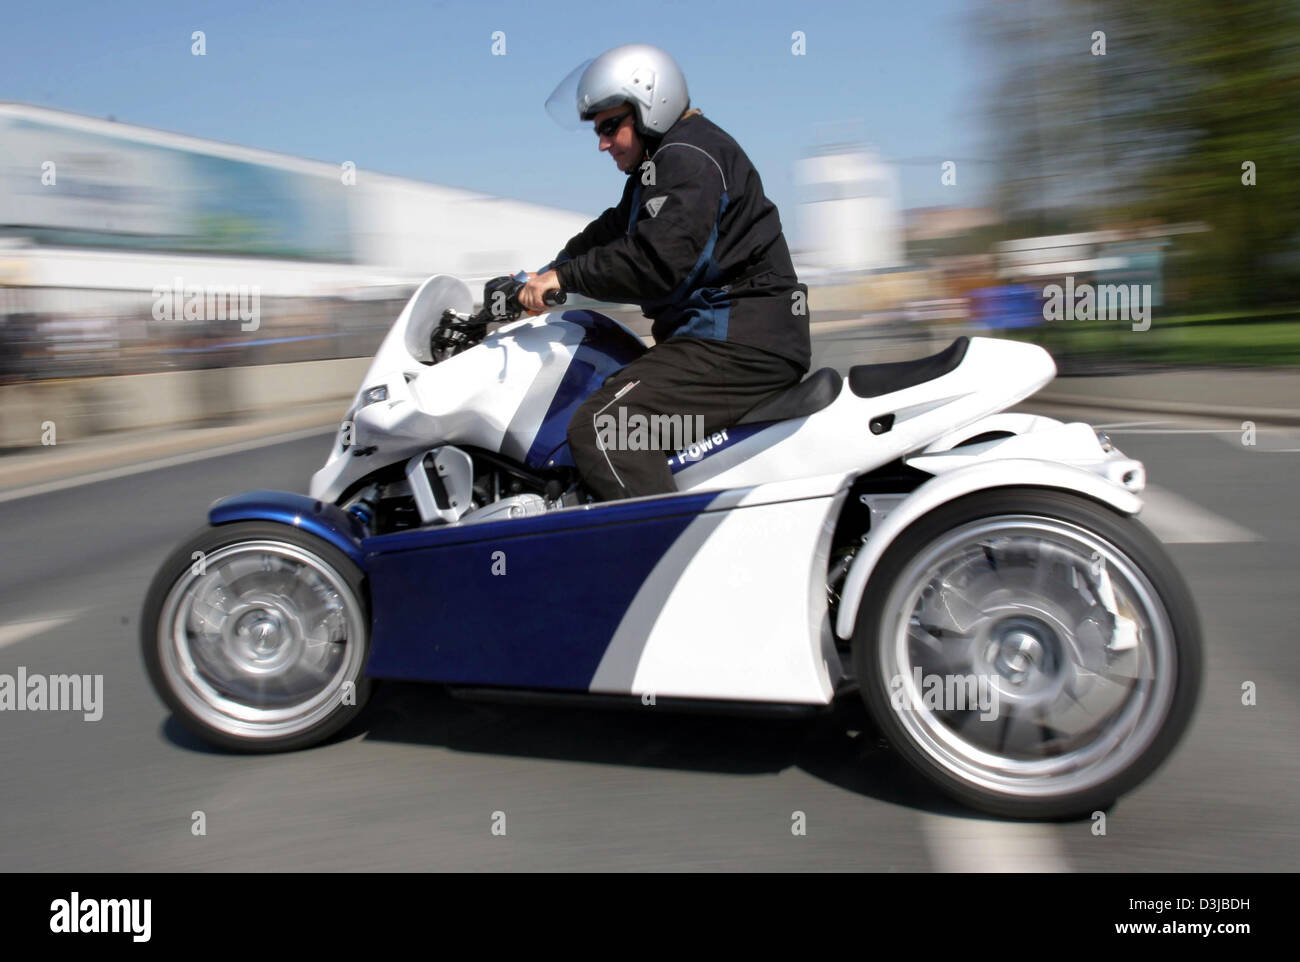 dpa) - A four wheel motor bike (quad) crosses a street in Kulmbach, Germany,  23 April 2005. The presently only German quad was constructed by Swiss  producers Grueter and Gut. (GG) using